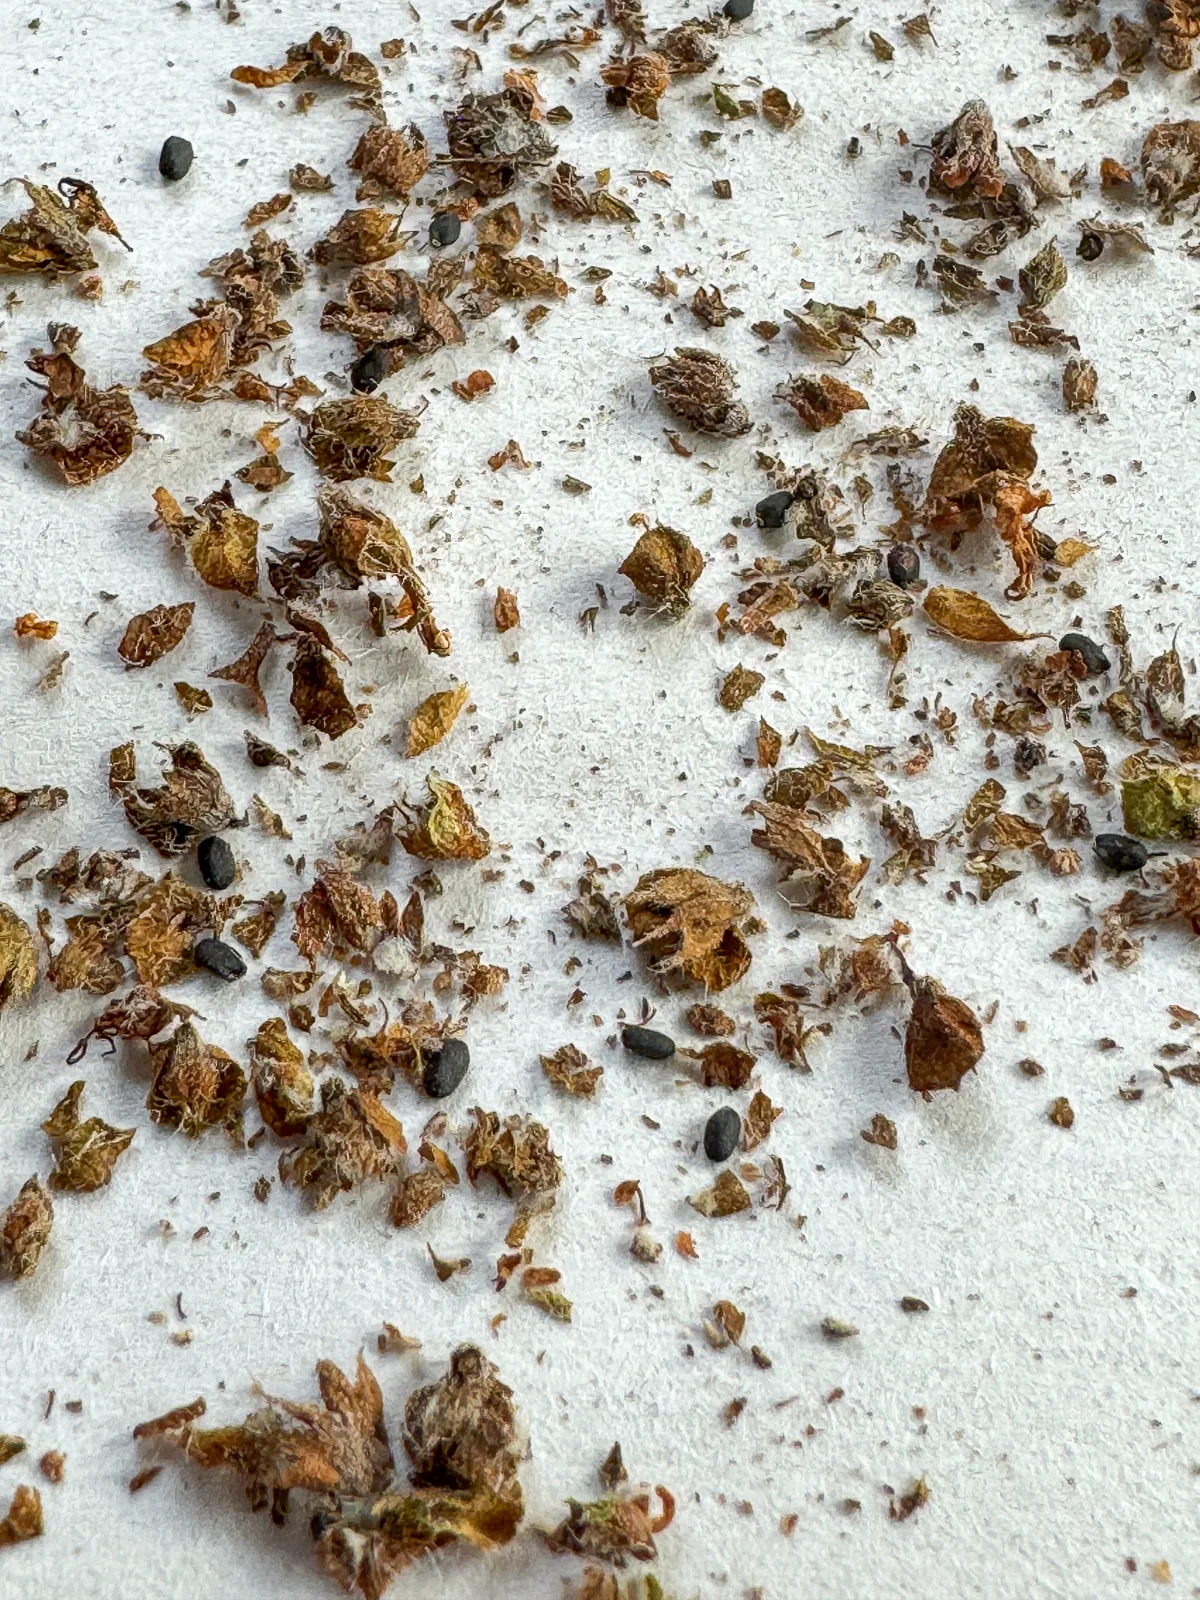 basil seeds scattered among chaff on a piece of paper